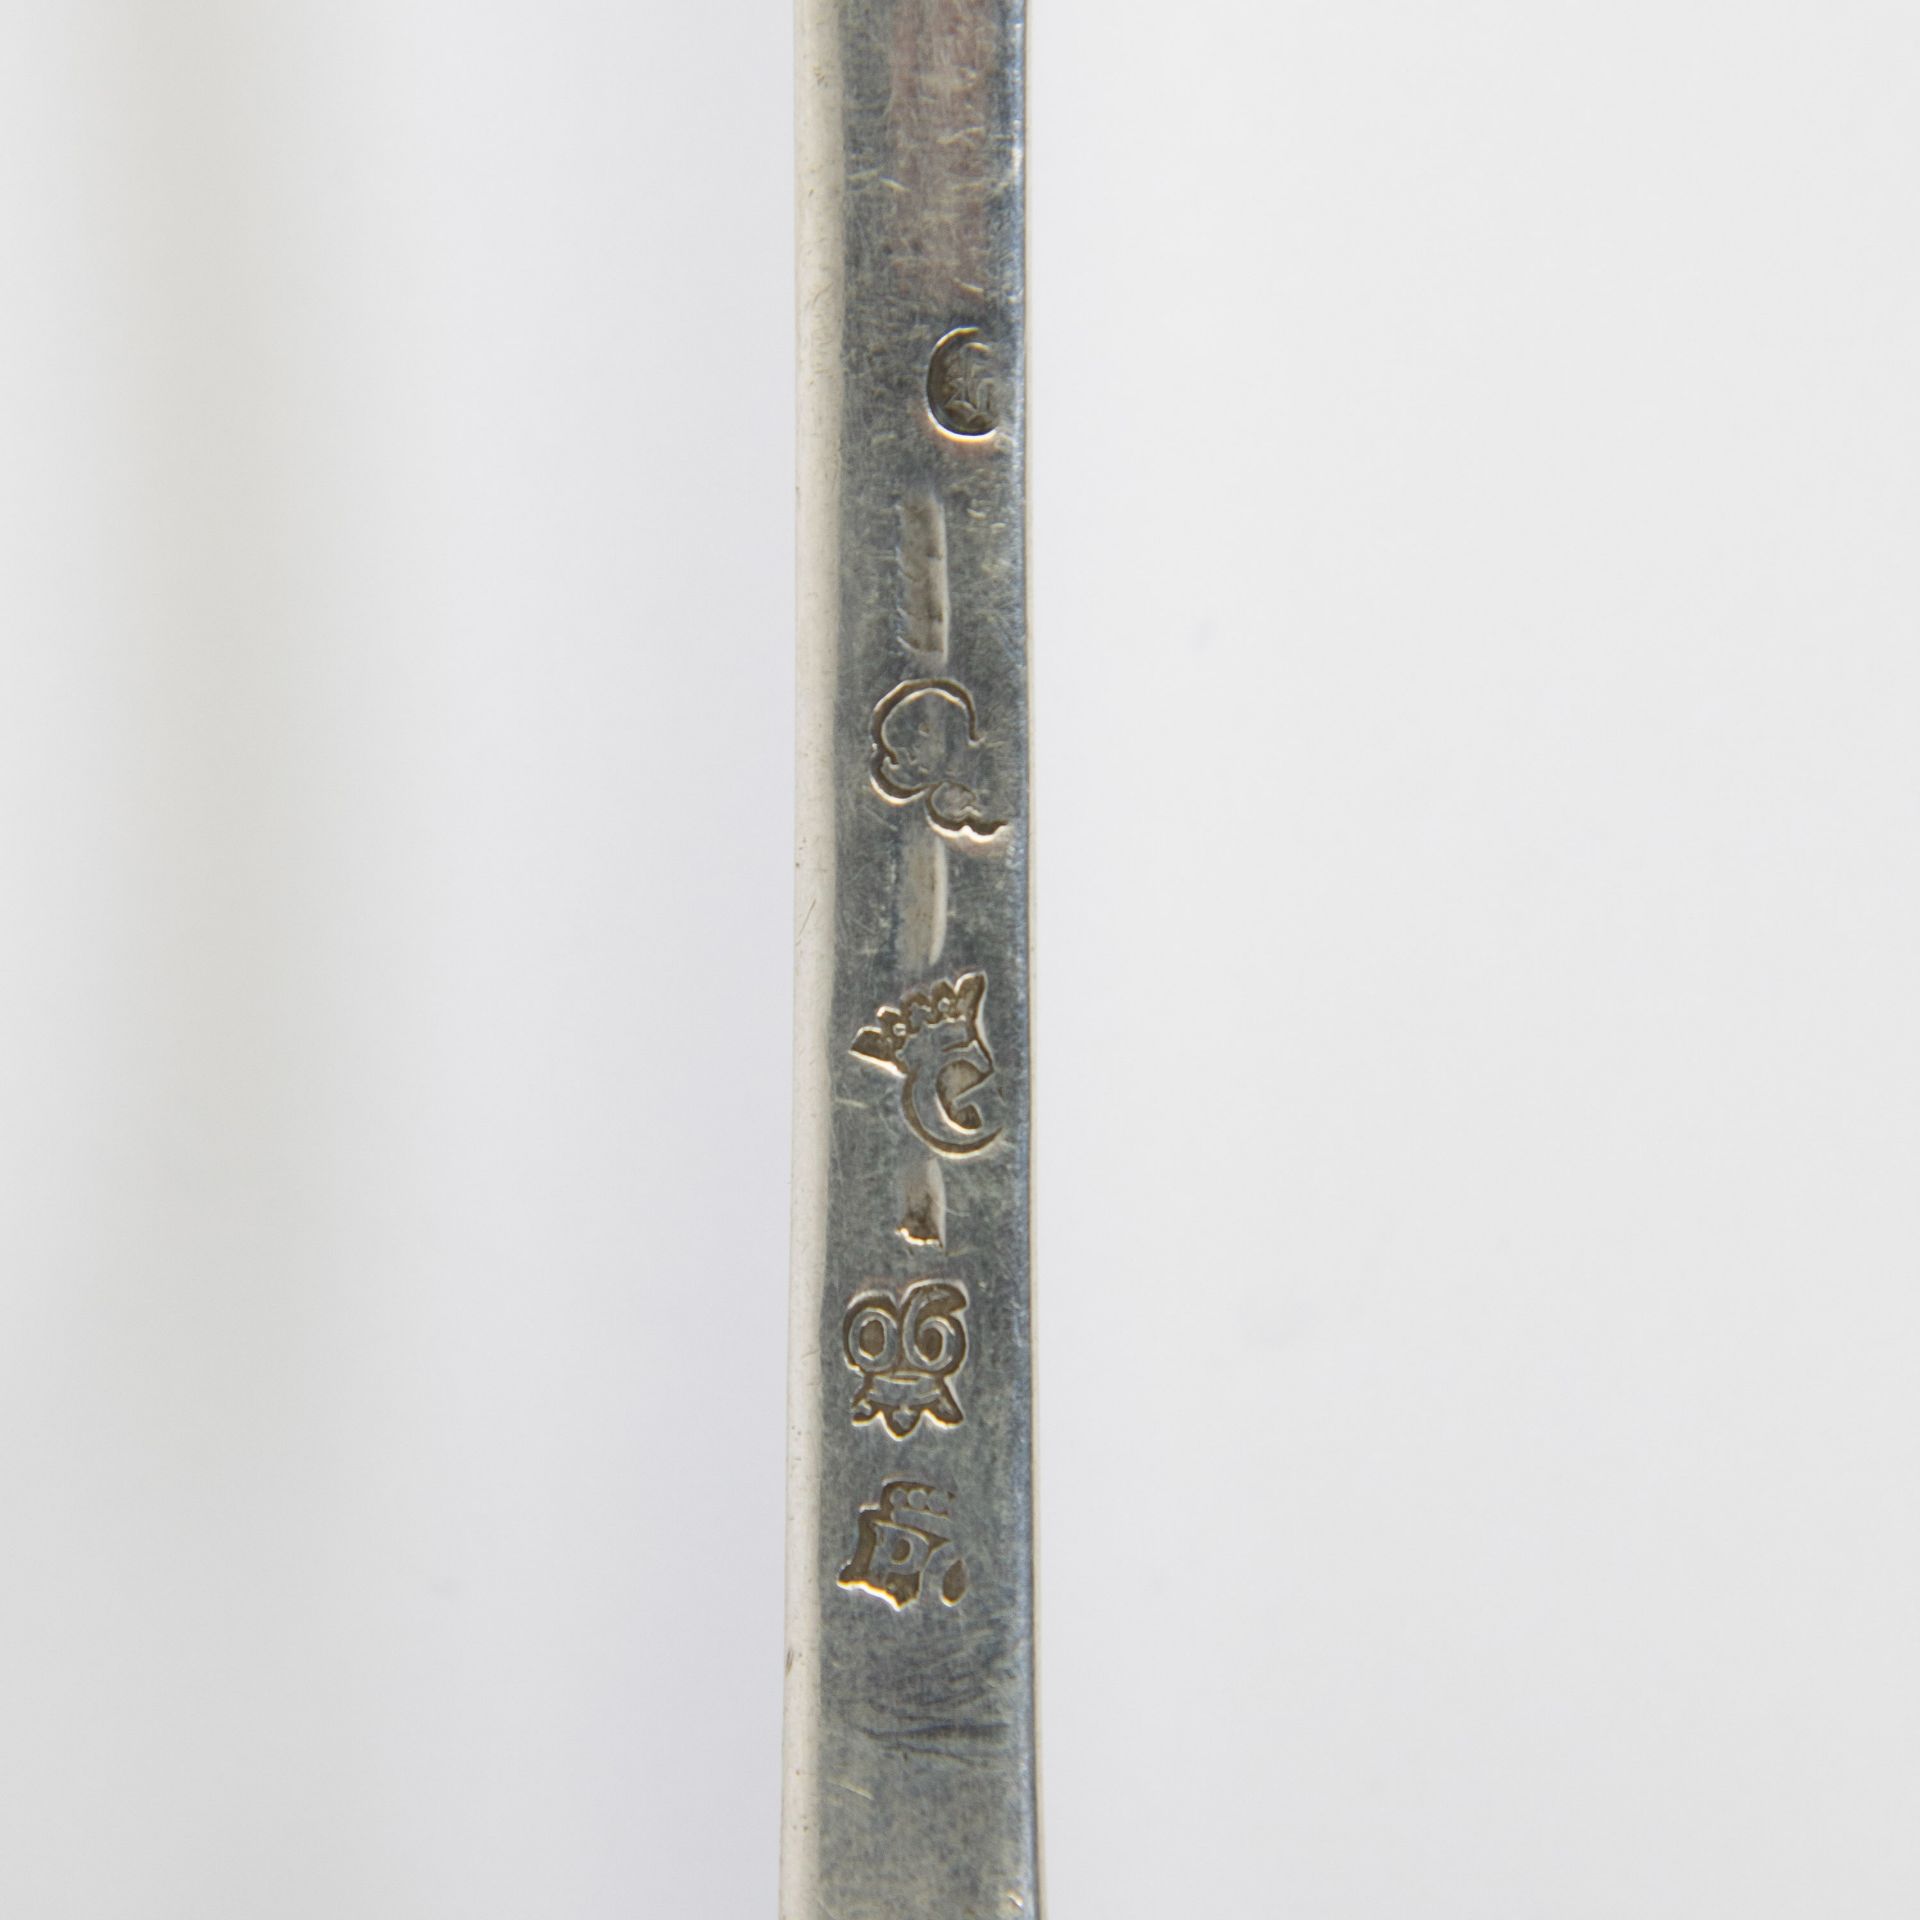 Silver soup spoon, Ghent 1790, Pieter Collé - Image 3 of 5